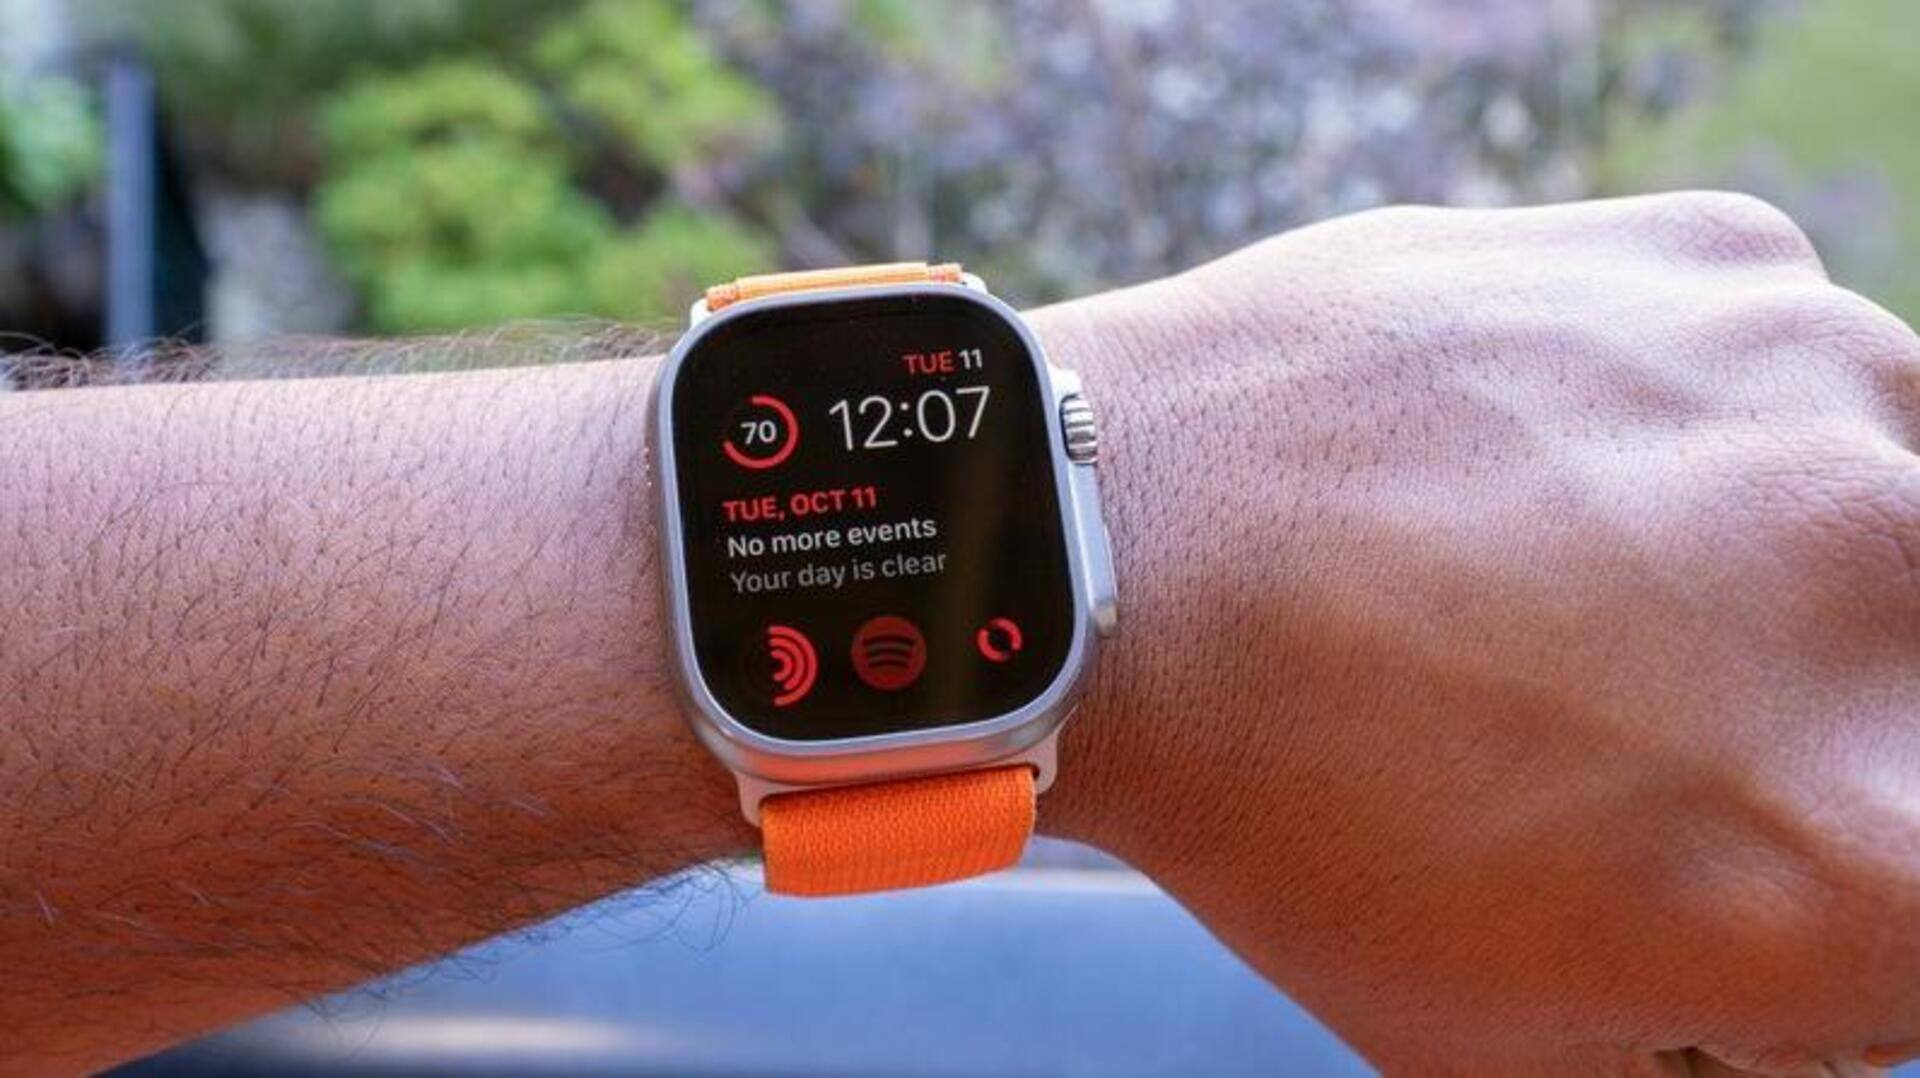 Apple Watch Ultra struggling with low light visibility: Report